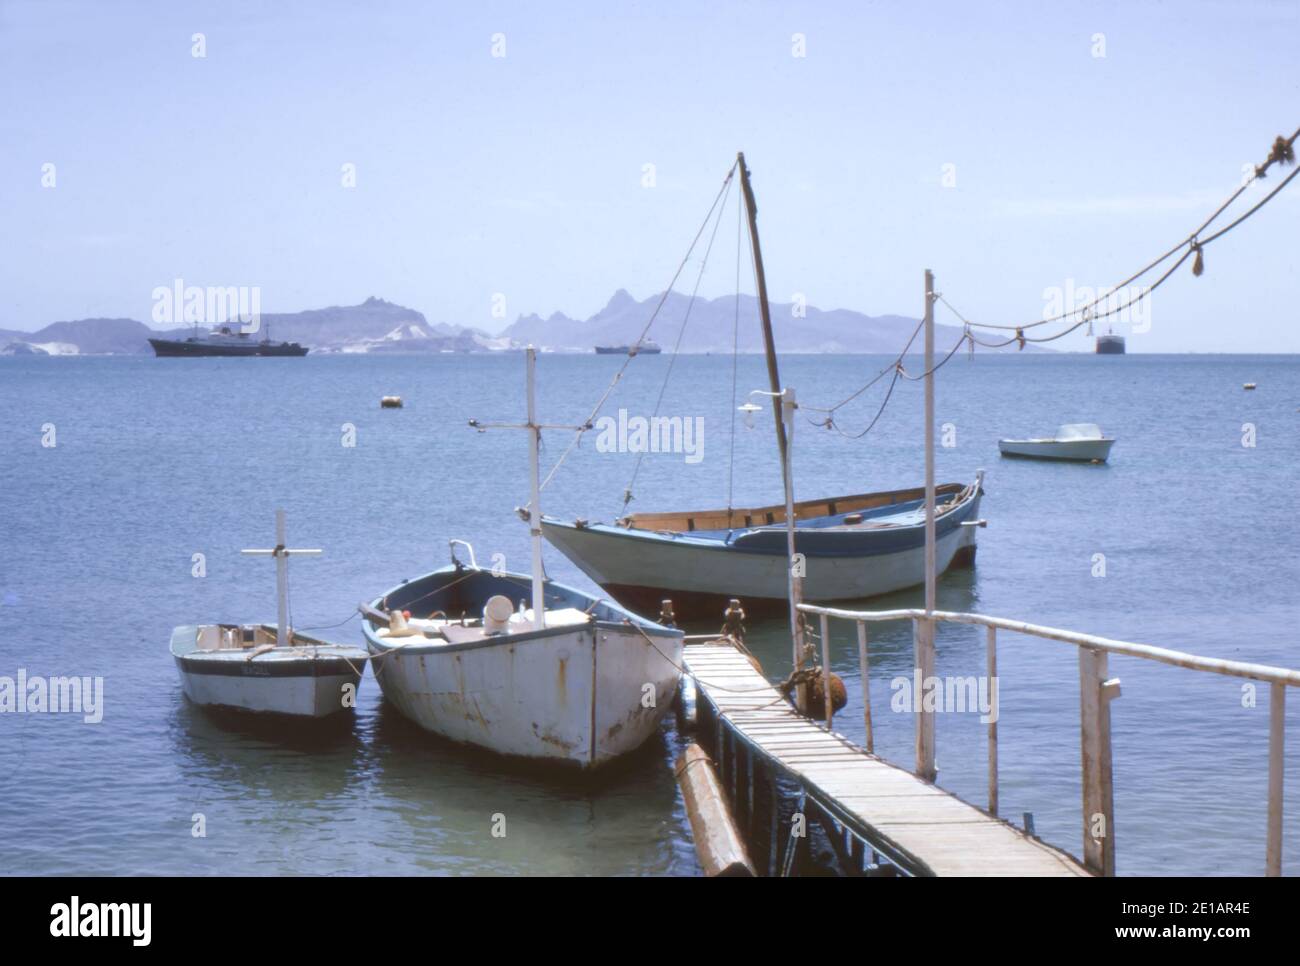 Boats of the  RAF Steamer Point Power Boat Club, based in Aden, Yemen. 1965. Little Aden can be seen on the horizon. Stock Photo